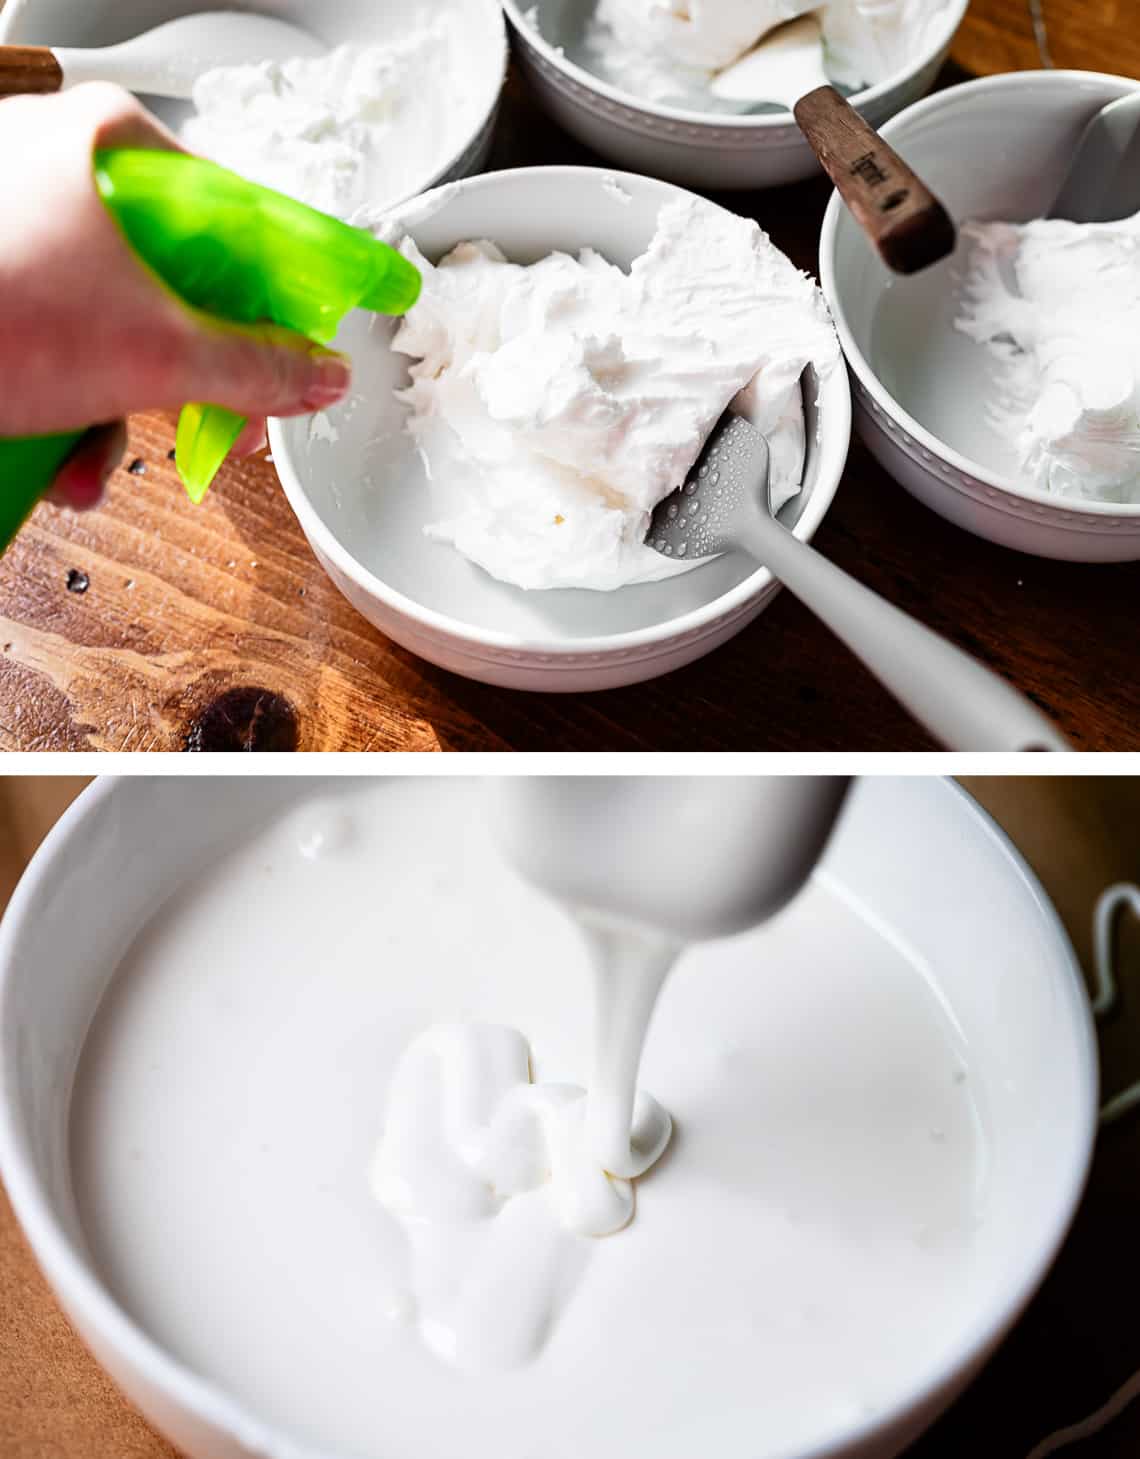 top spray bottle spraying white frosting in bowl, bottom thinner white frosting dripping into bowl.